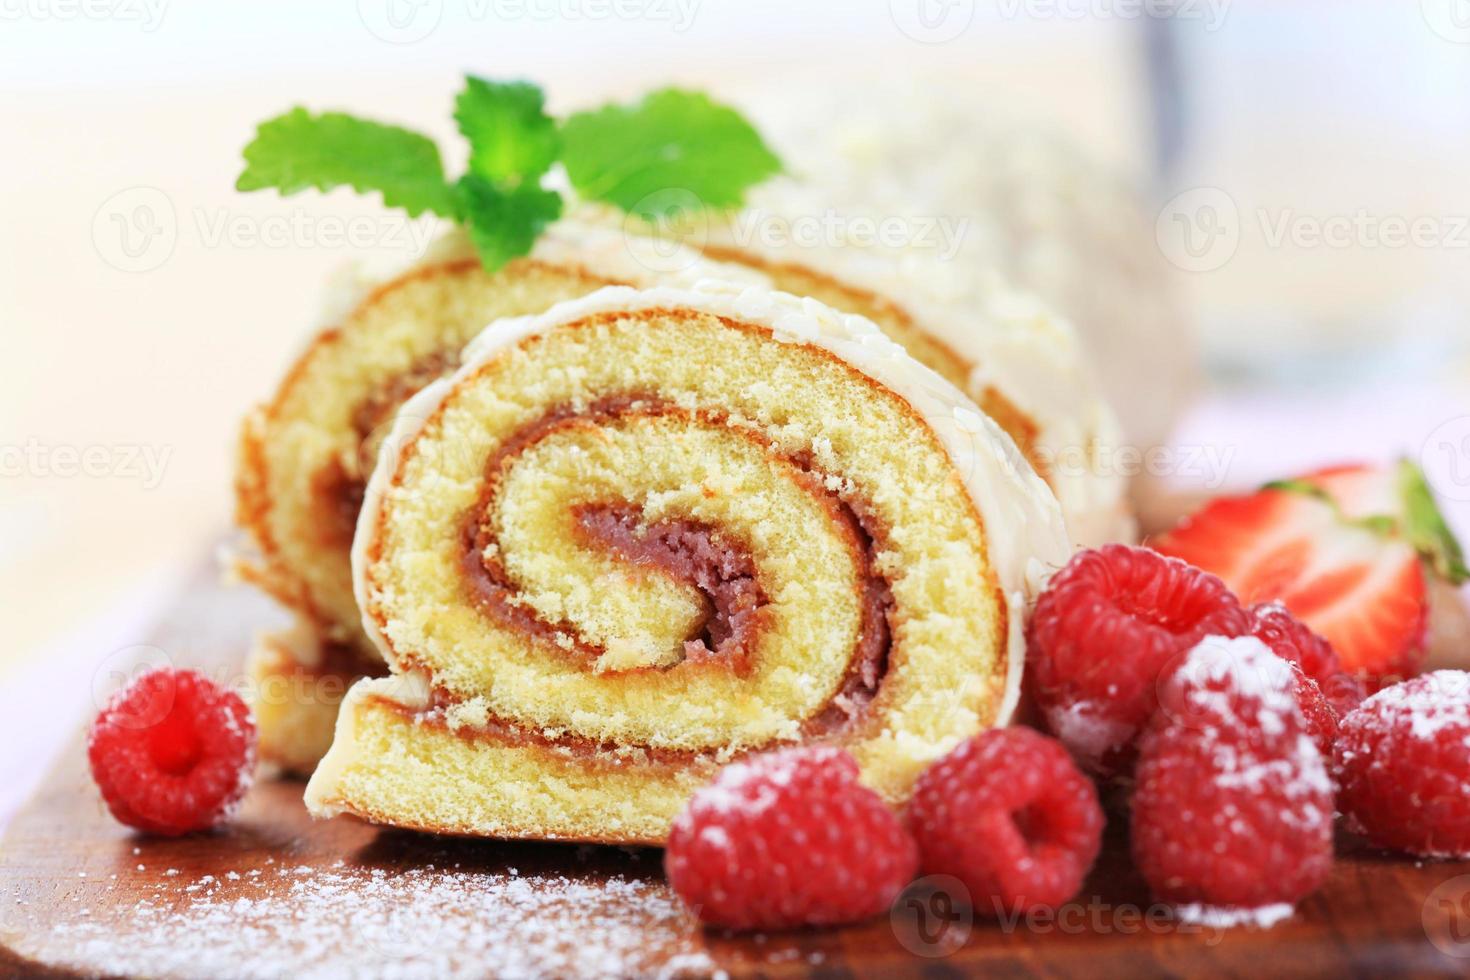 Swiss roll glazed with white chocolate icing photo